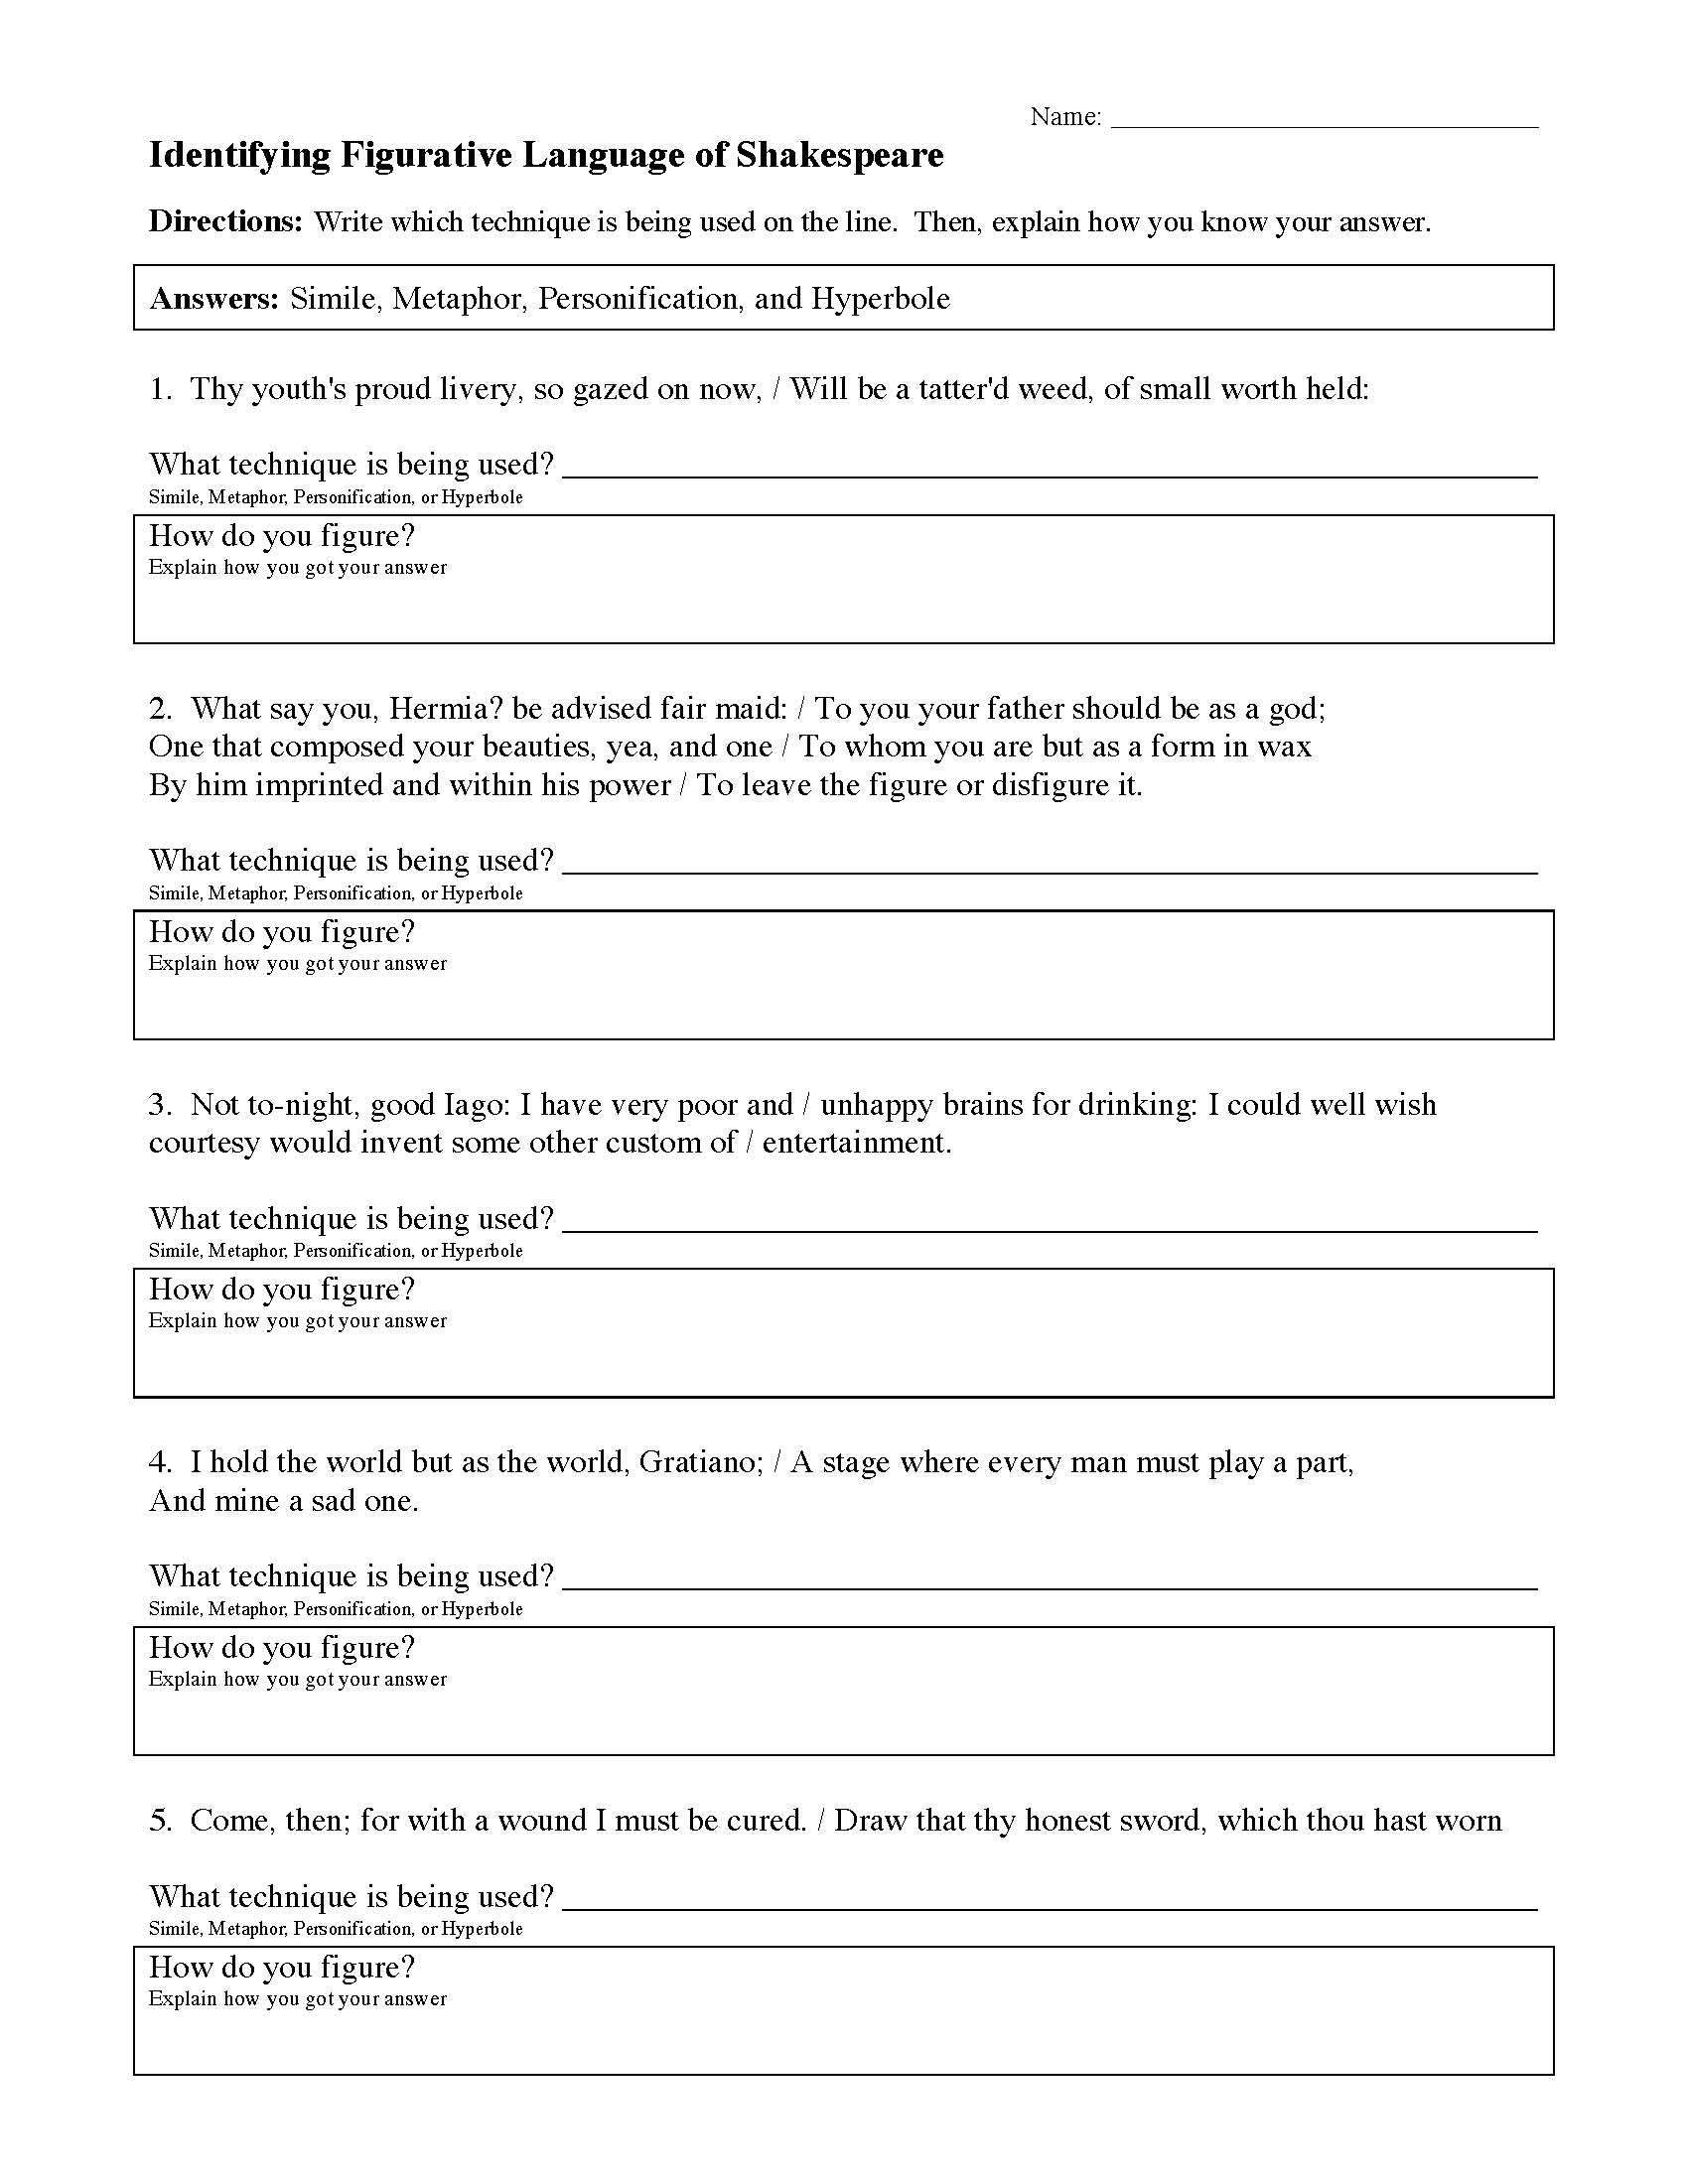 ereading-figurative-language-powerpoint-emanuel-hill-s-reading-worksheets